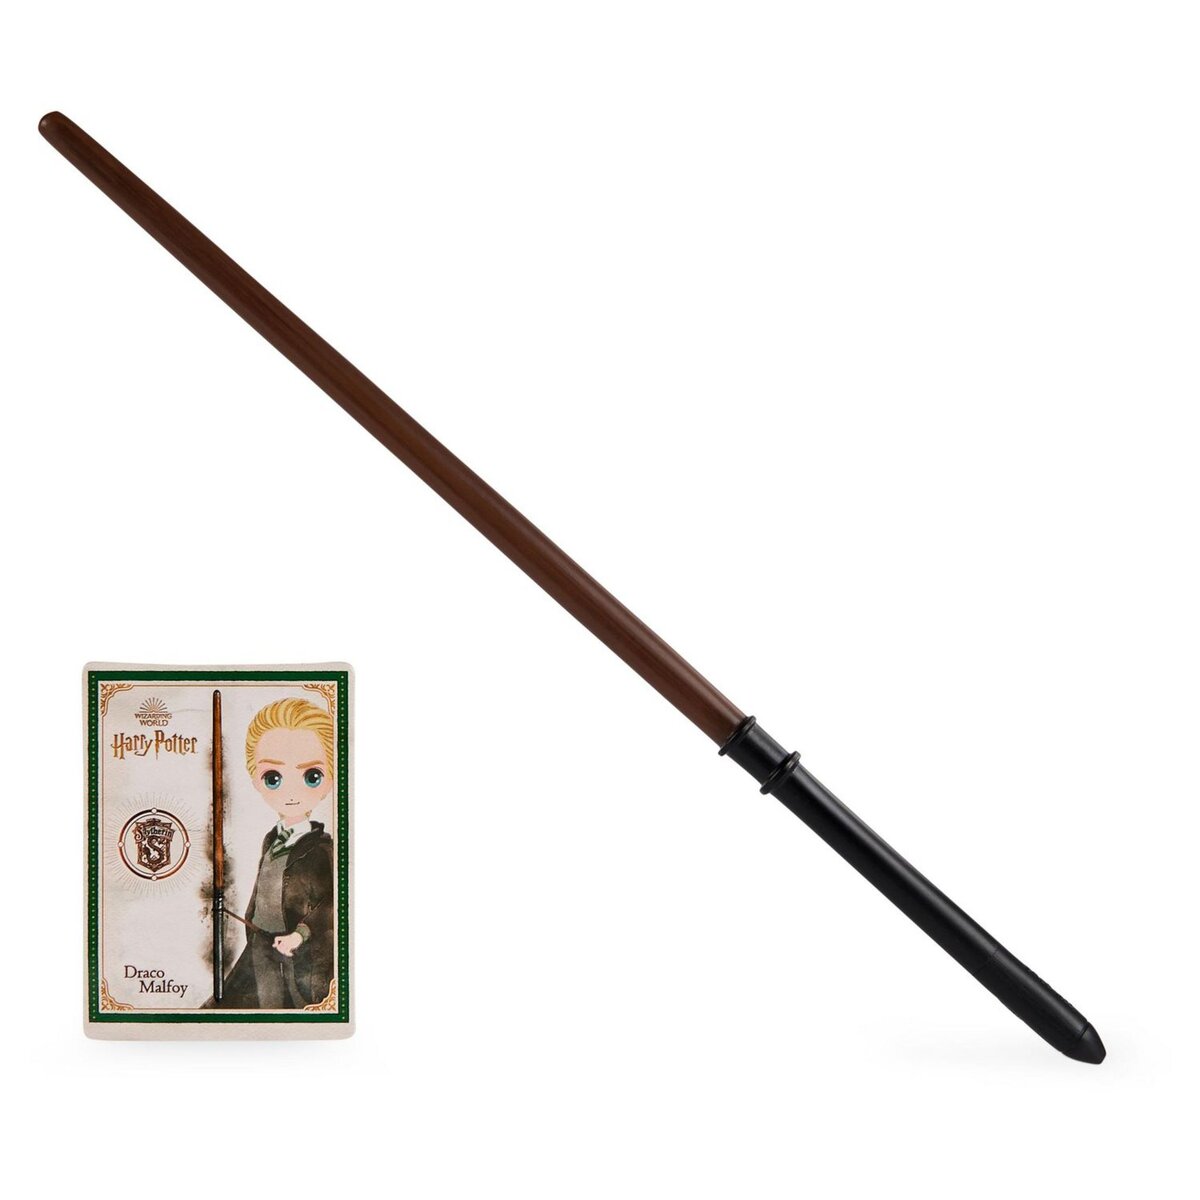 SPIN MASTER Baguette Magique Deluxe Drago Malefoy - Wizarding World